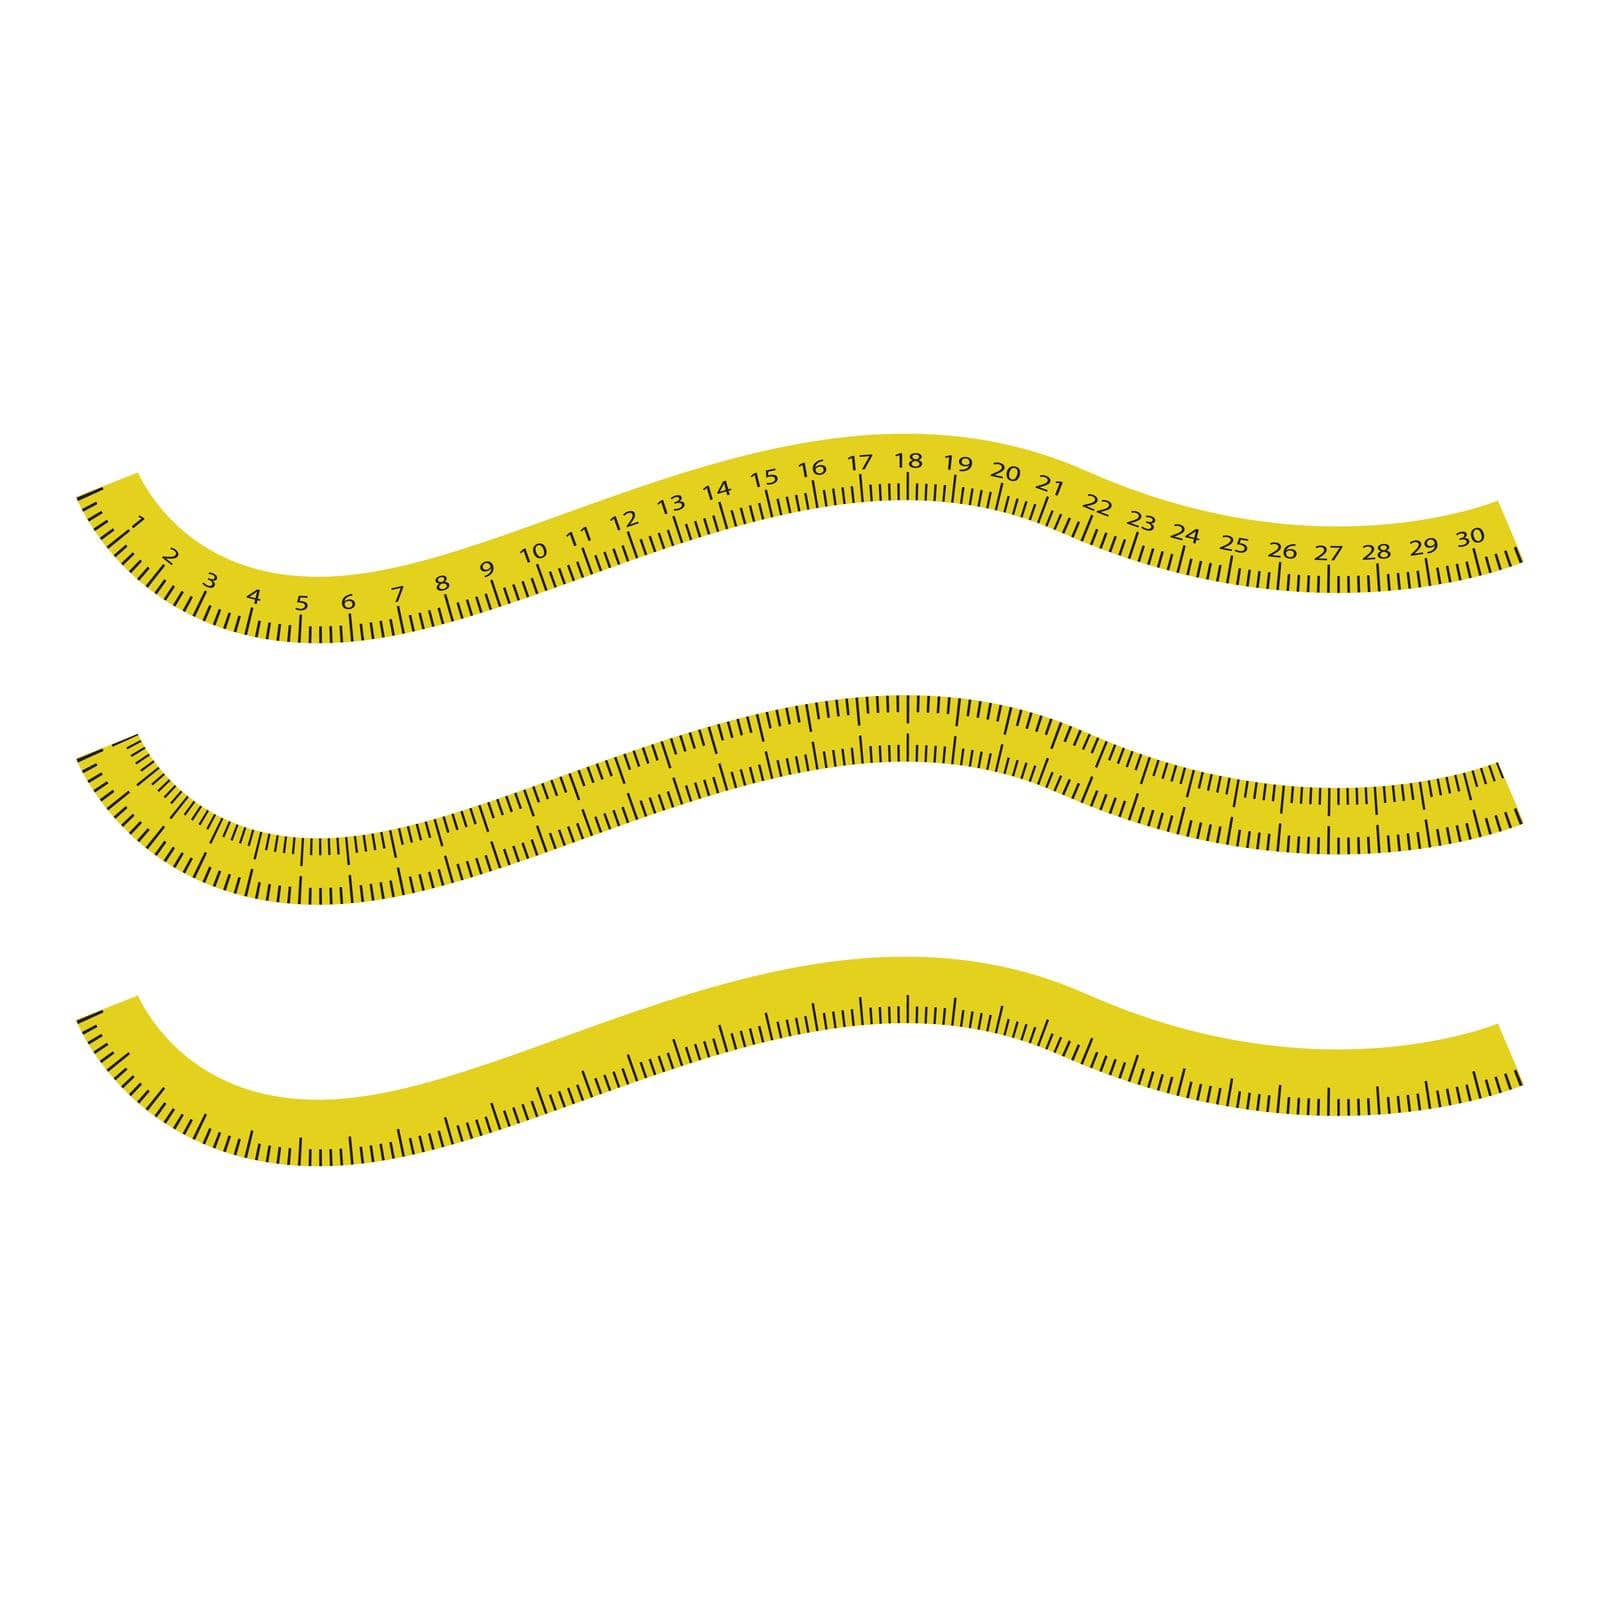 measuring tape centimeter vector by Mrsongrphc